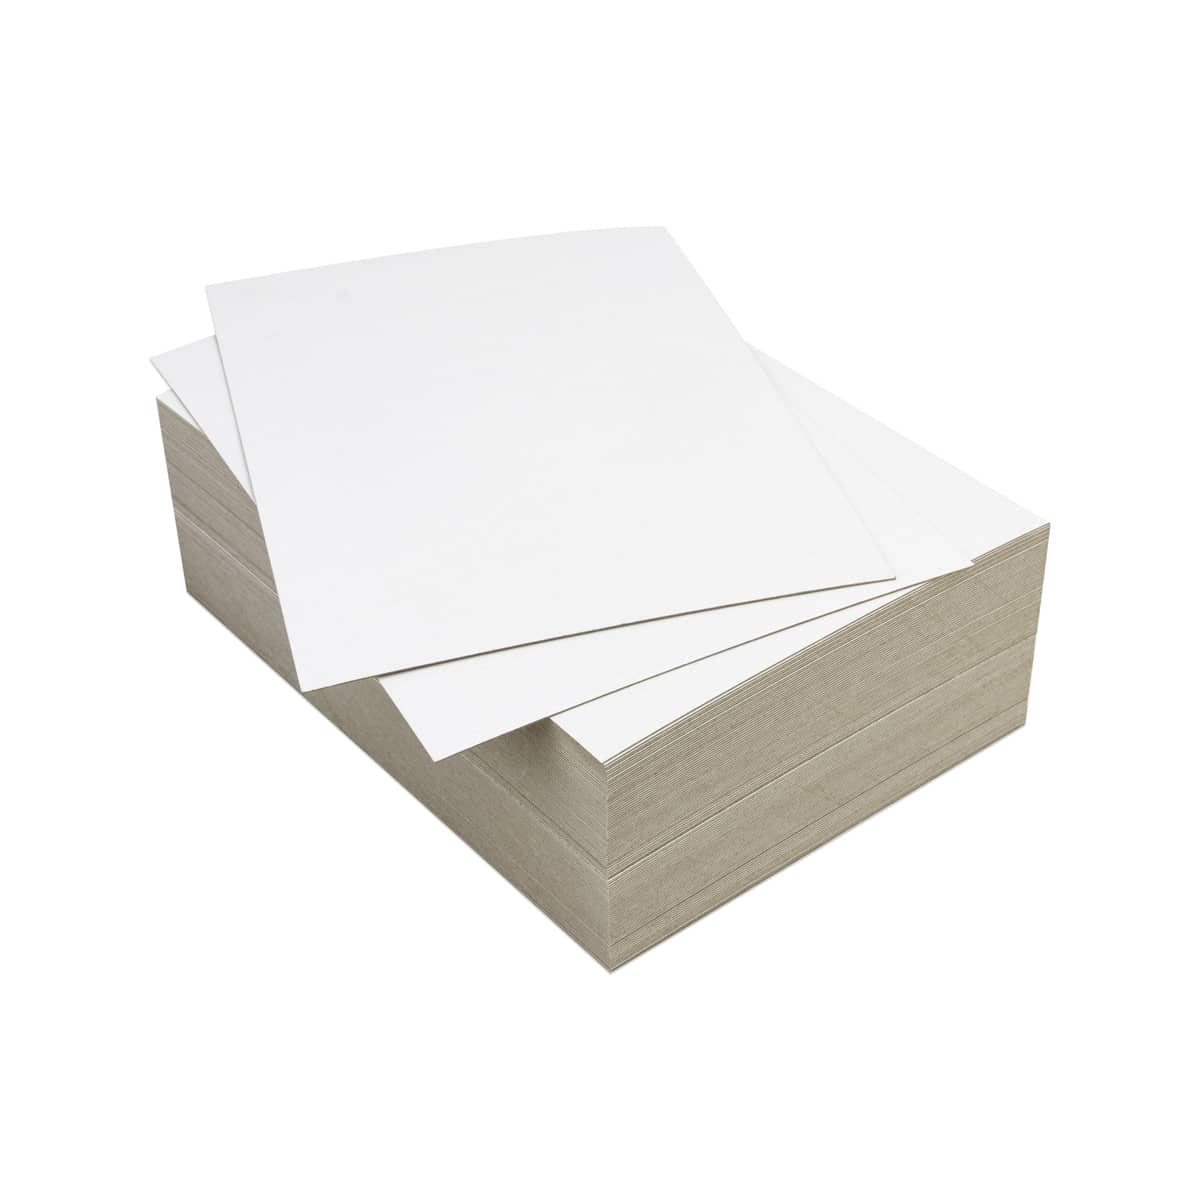 thin cardboard paper sheets, thin cardboard paper sheets Suppliers